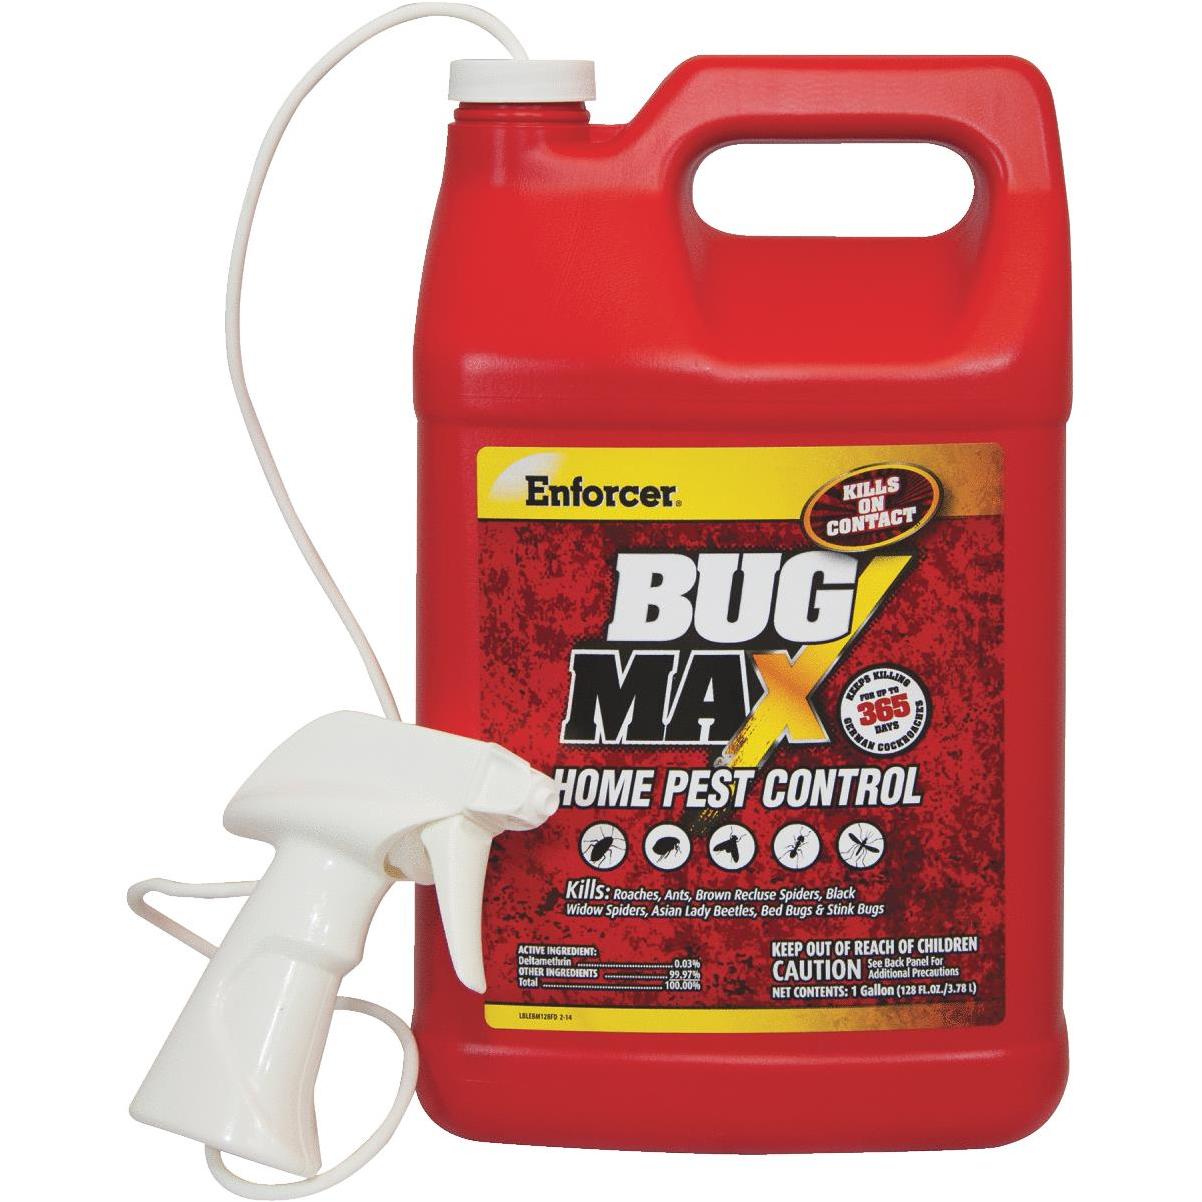 Bengal Flying Insect Killer 2  Bug Spray for Indoor & Outdoor Use